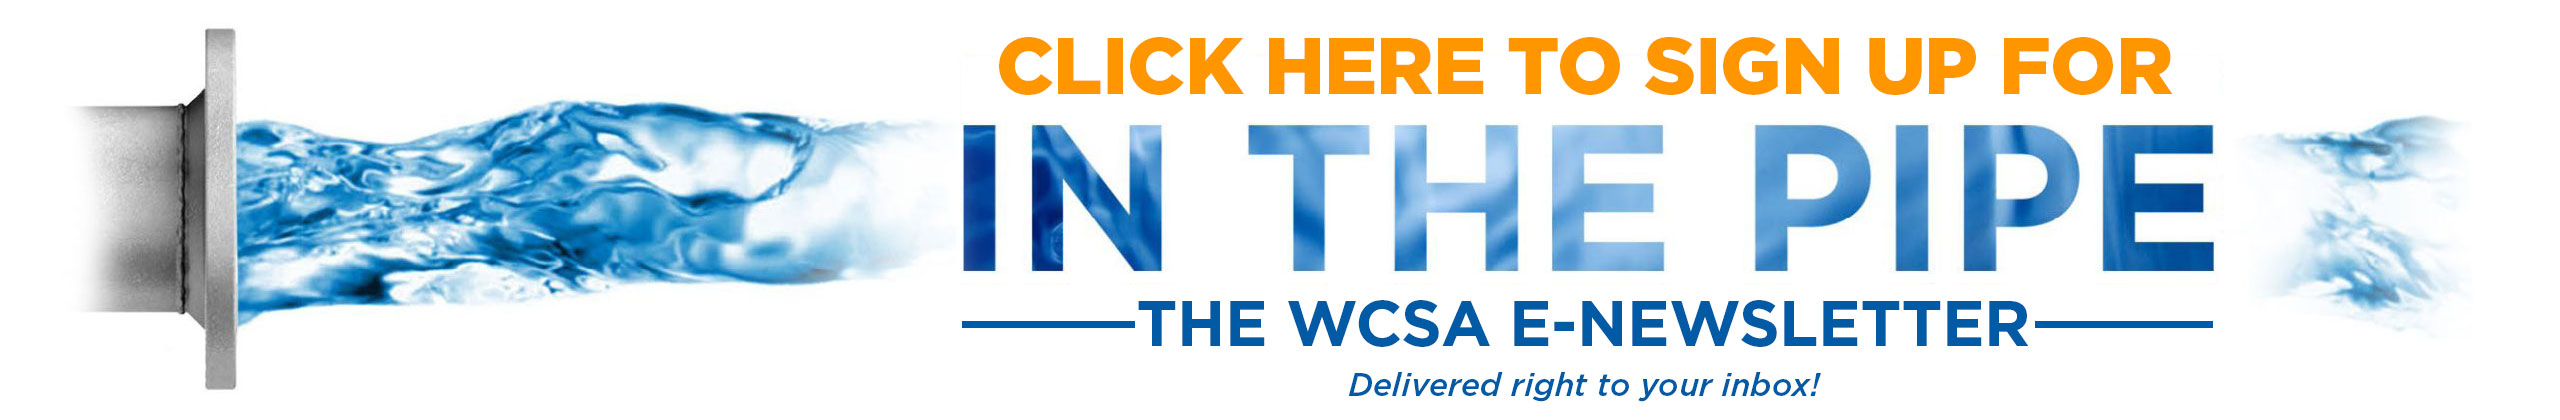 Click here to sign up for In The Pipe, the WCSA E-newsletter!